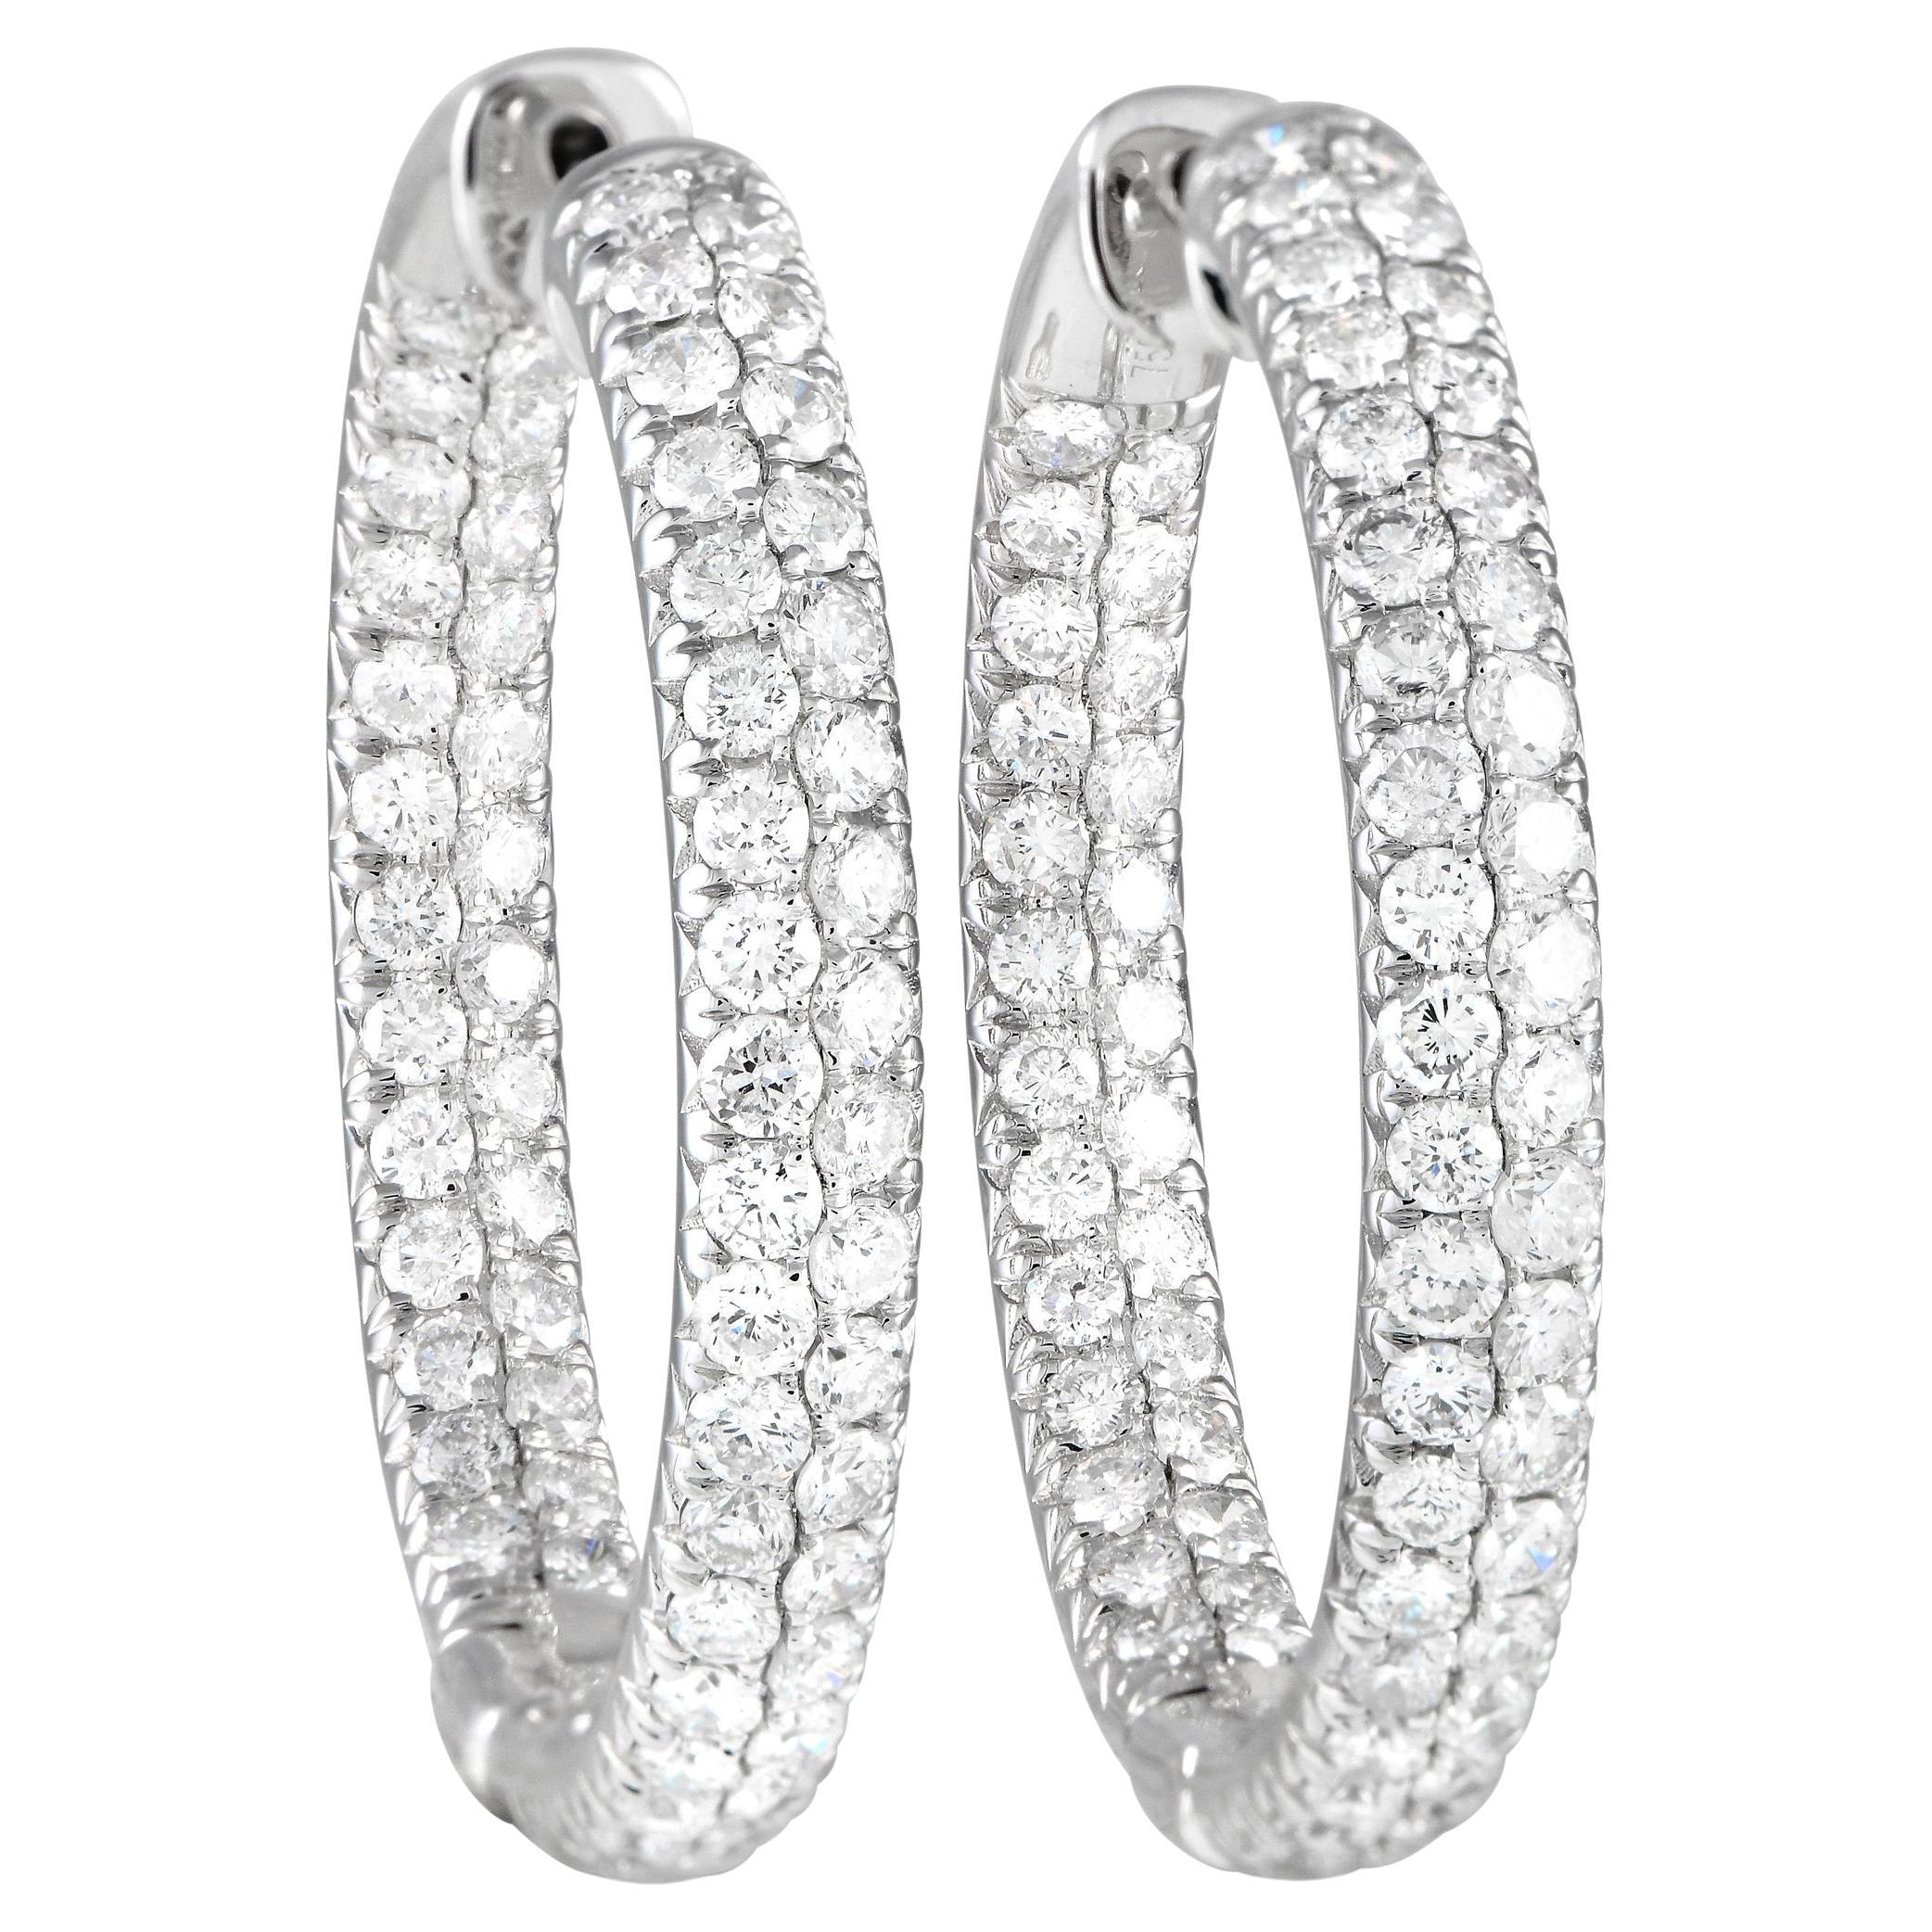 LB Exclusive 18K White Gold 3.55ct Diamond Inside-Out Hoop Earrings For Sale